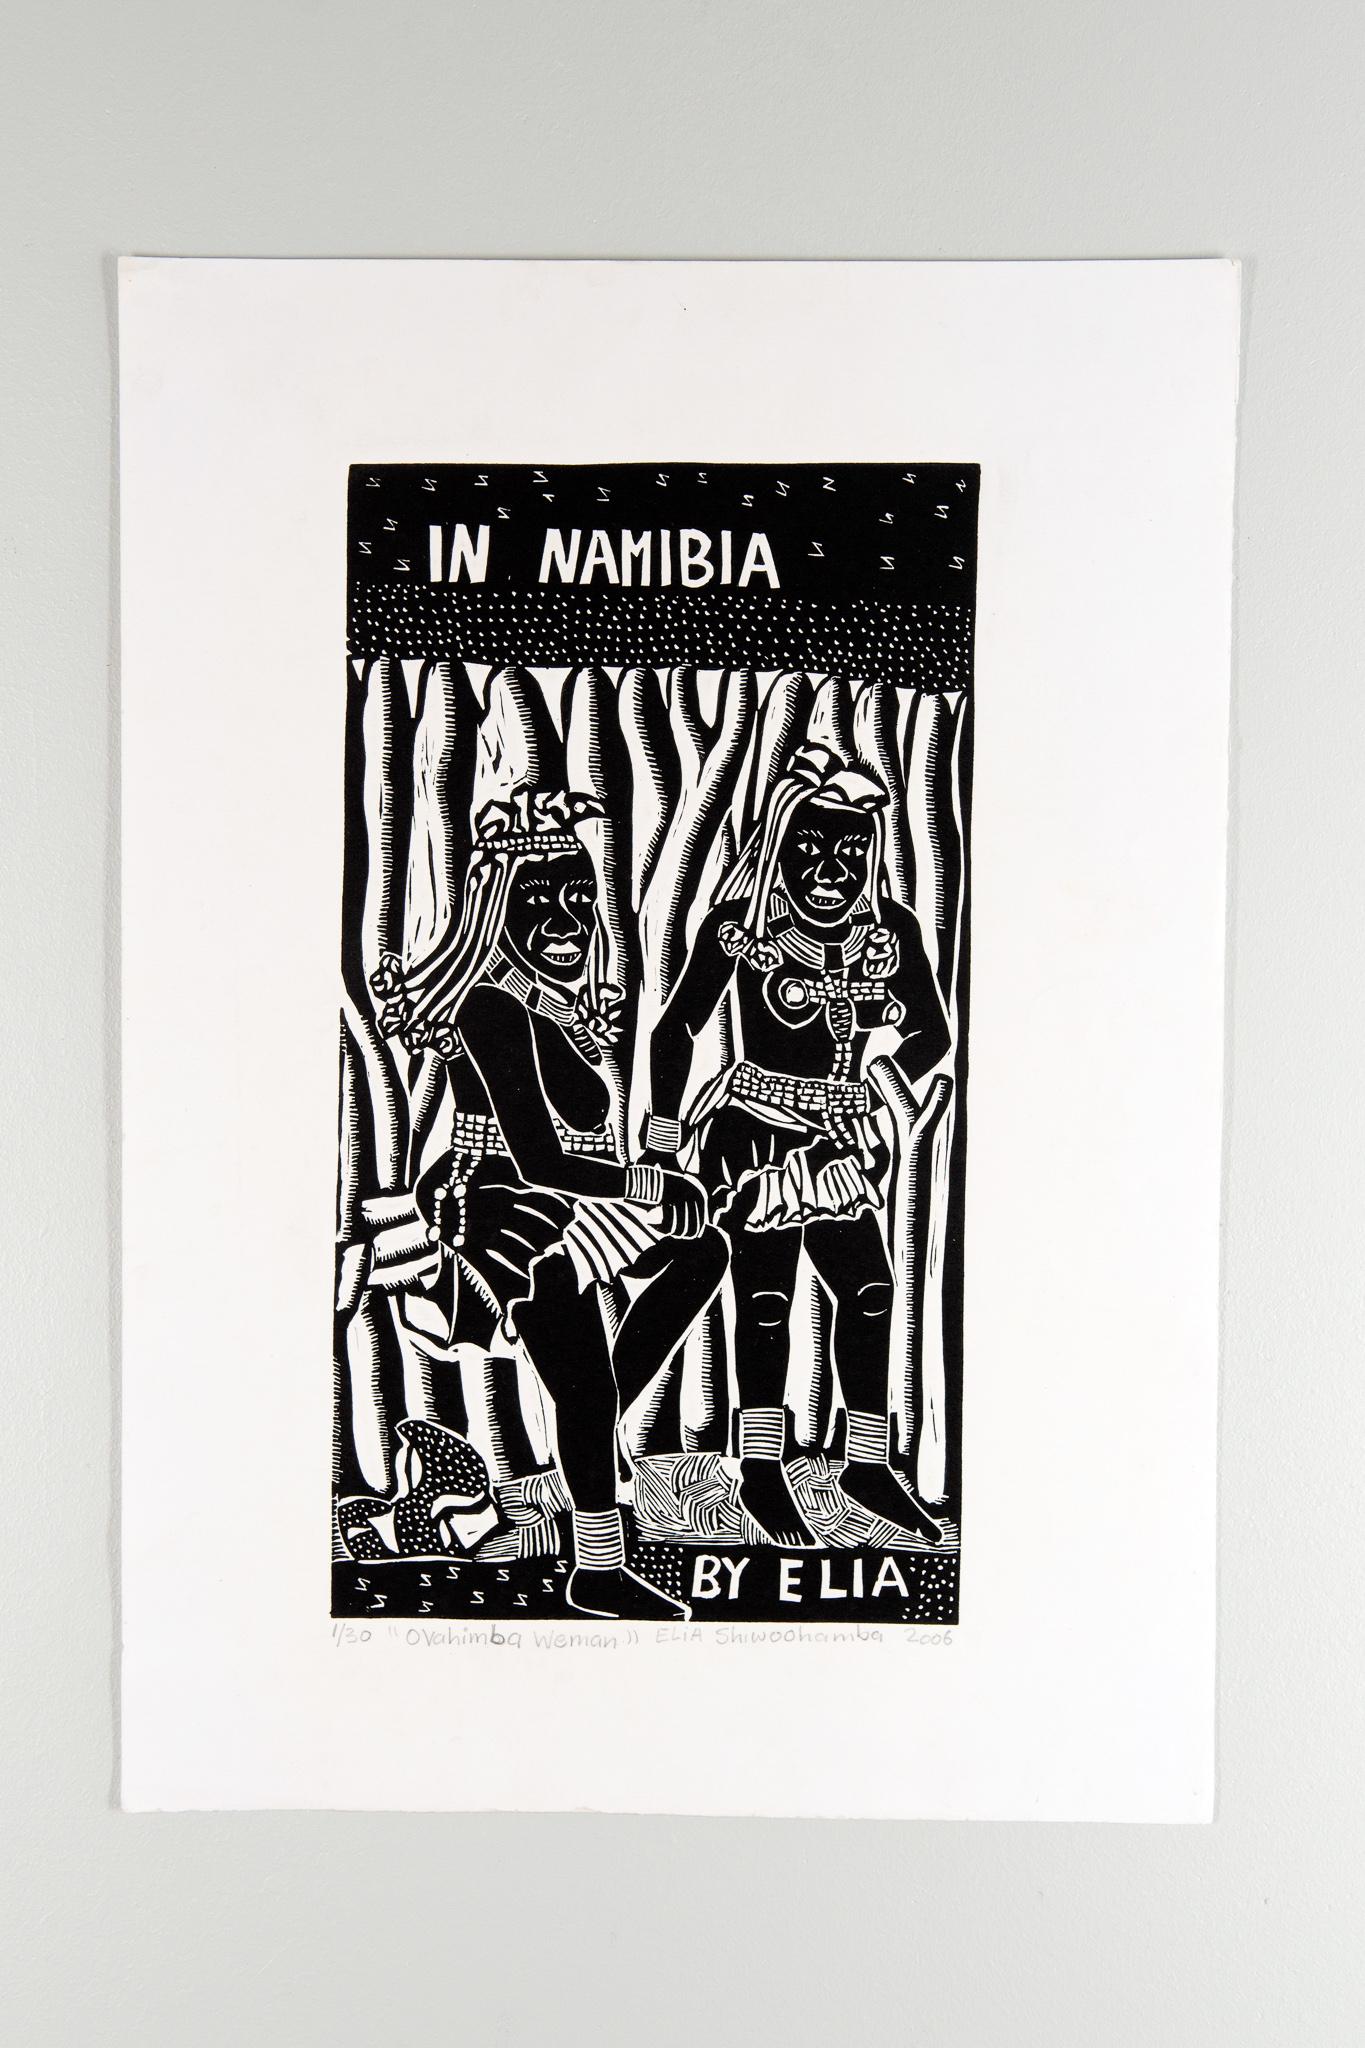 Ovahimba Women, 2006. Linoleum block print on paper. Edition of 30.

Elia Shiwoohamba was born in 1981 in Windhoek, Namibia. He graduated from the John Muafangejo Art Centre in Windhoek in 2006. Specialising in printmaking and sculpture, Shiwoohamba